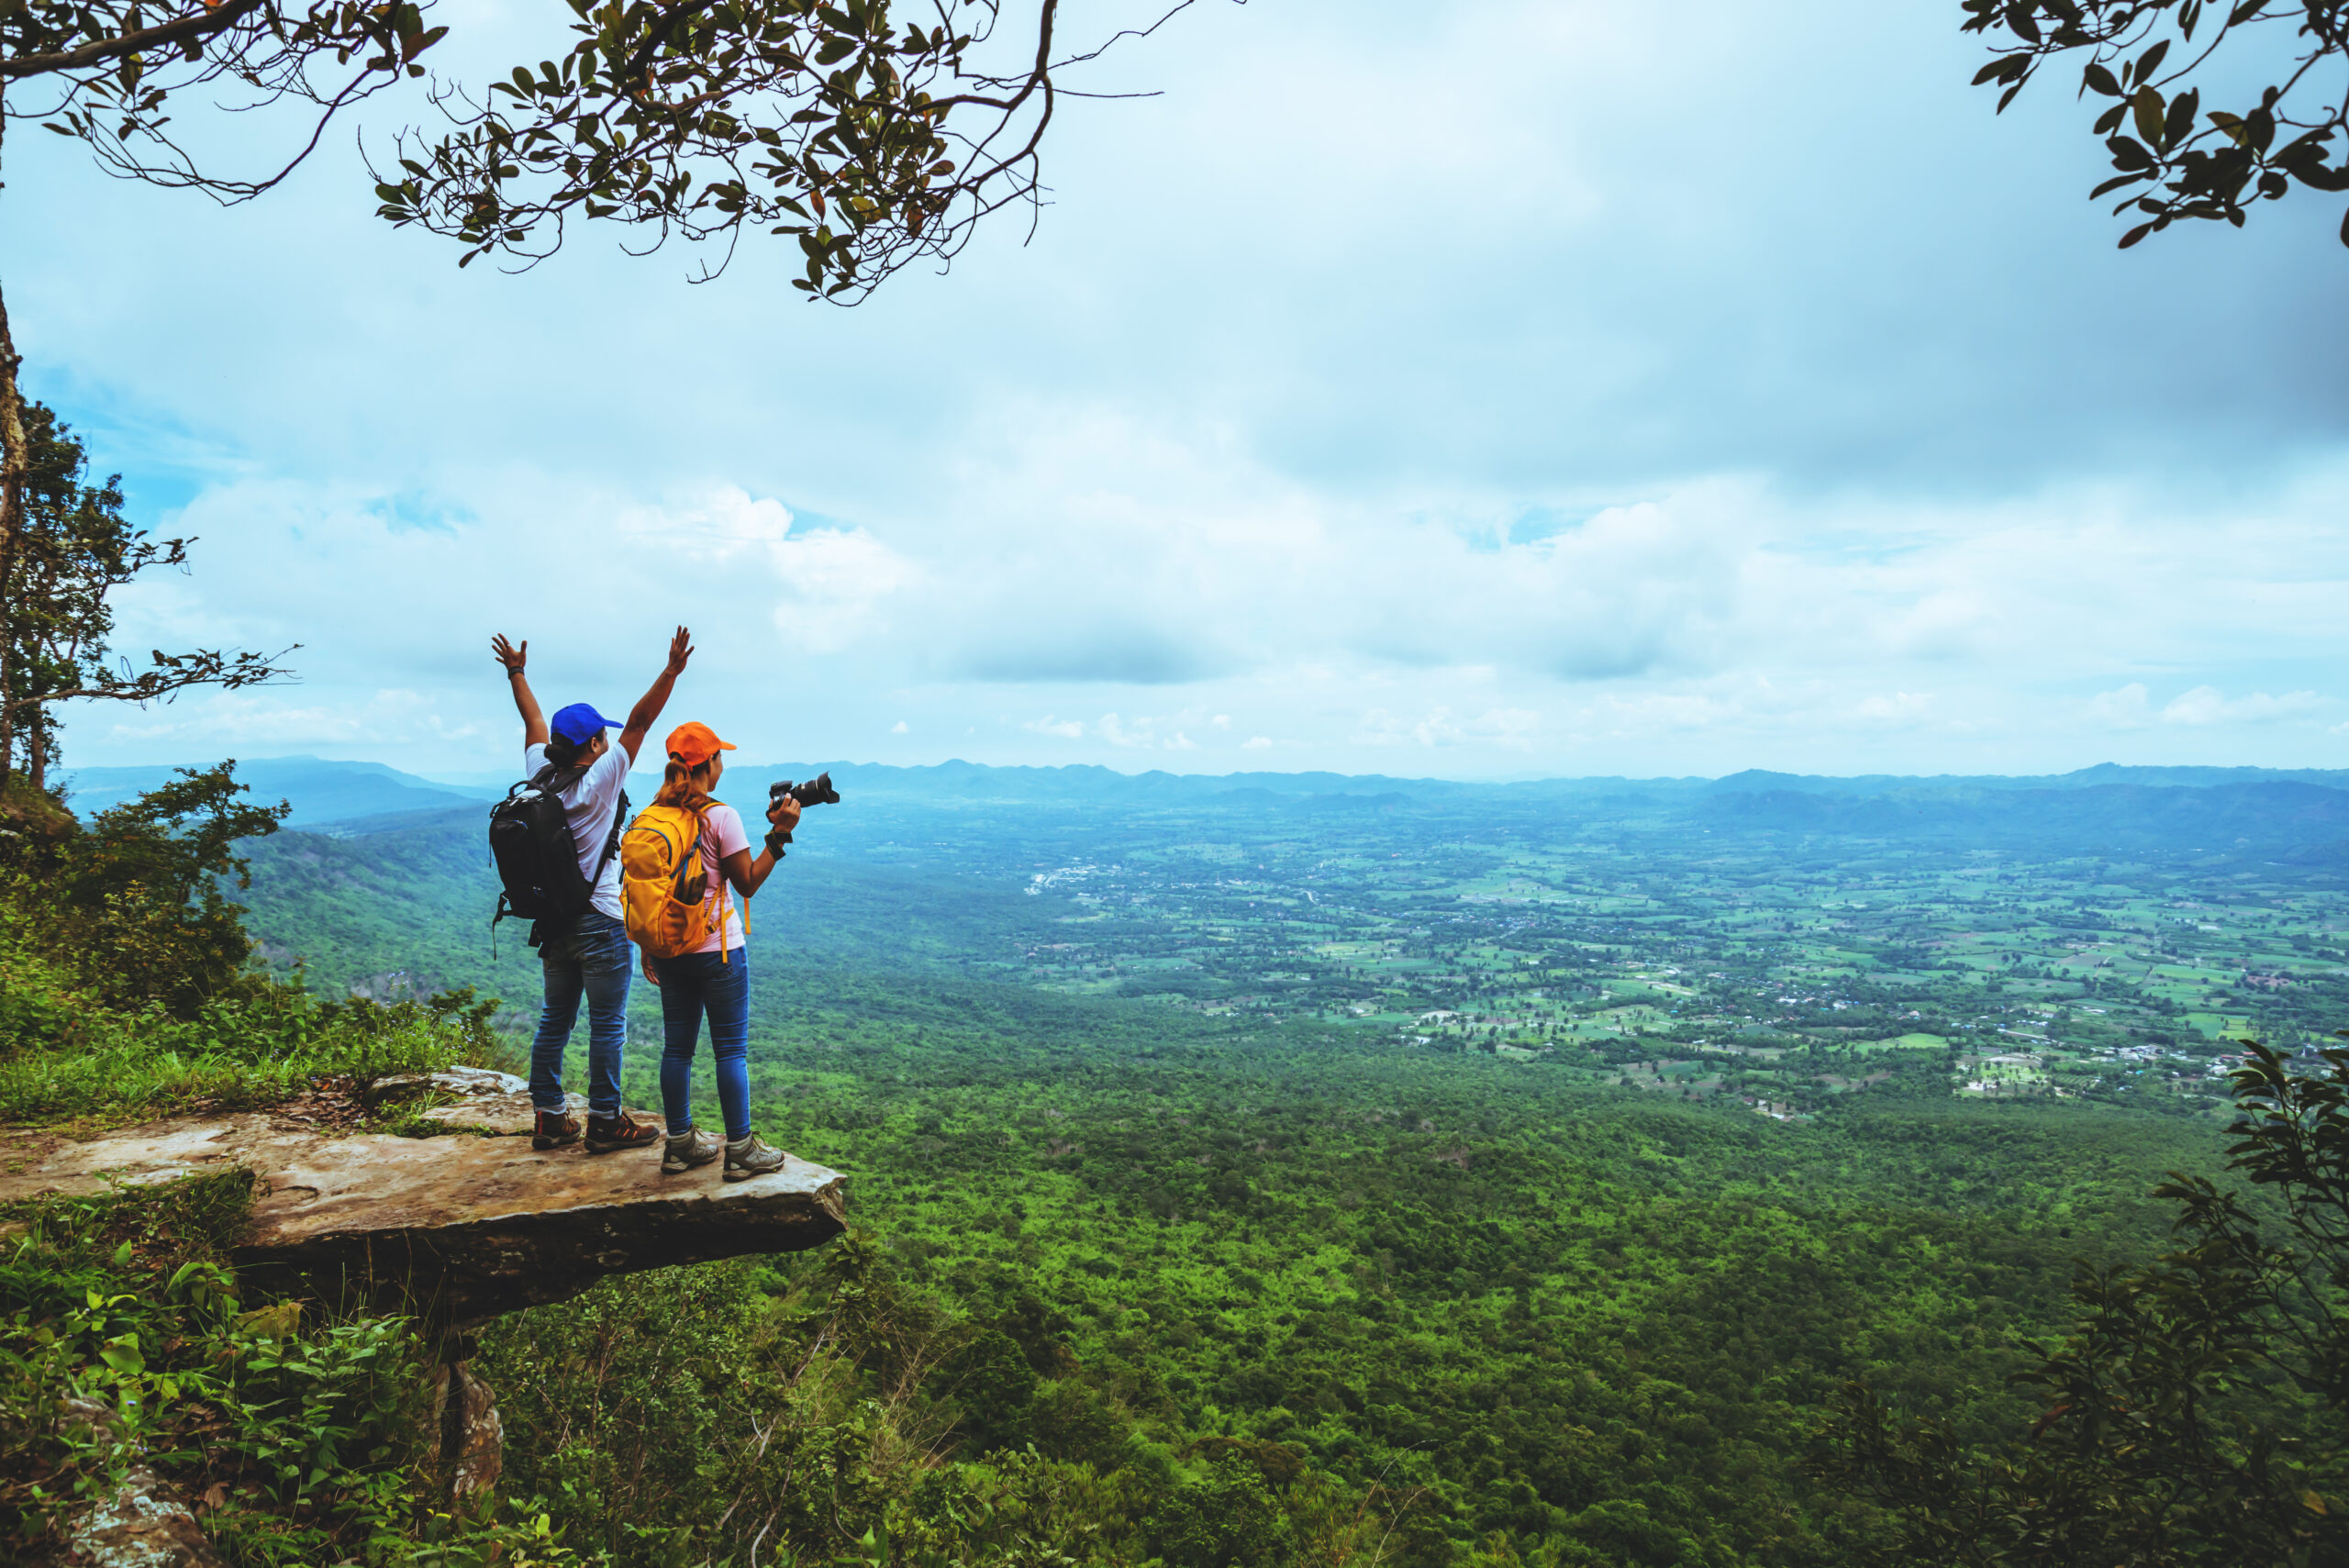 Experience and explore on extraordinary adventures with Delux Holidays to Sri Lanka.